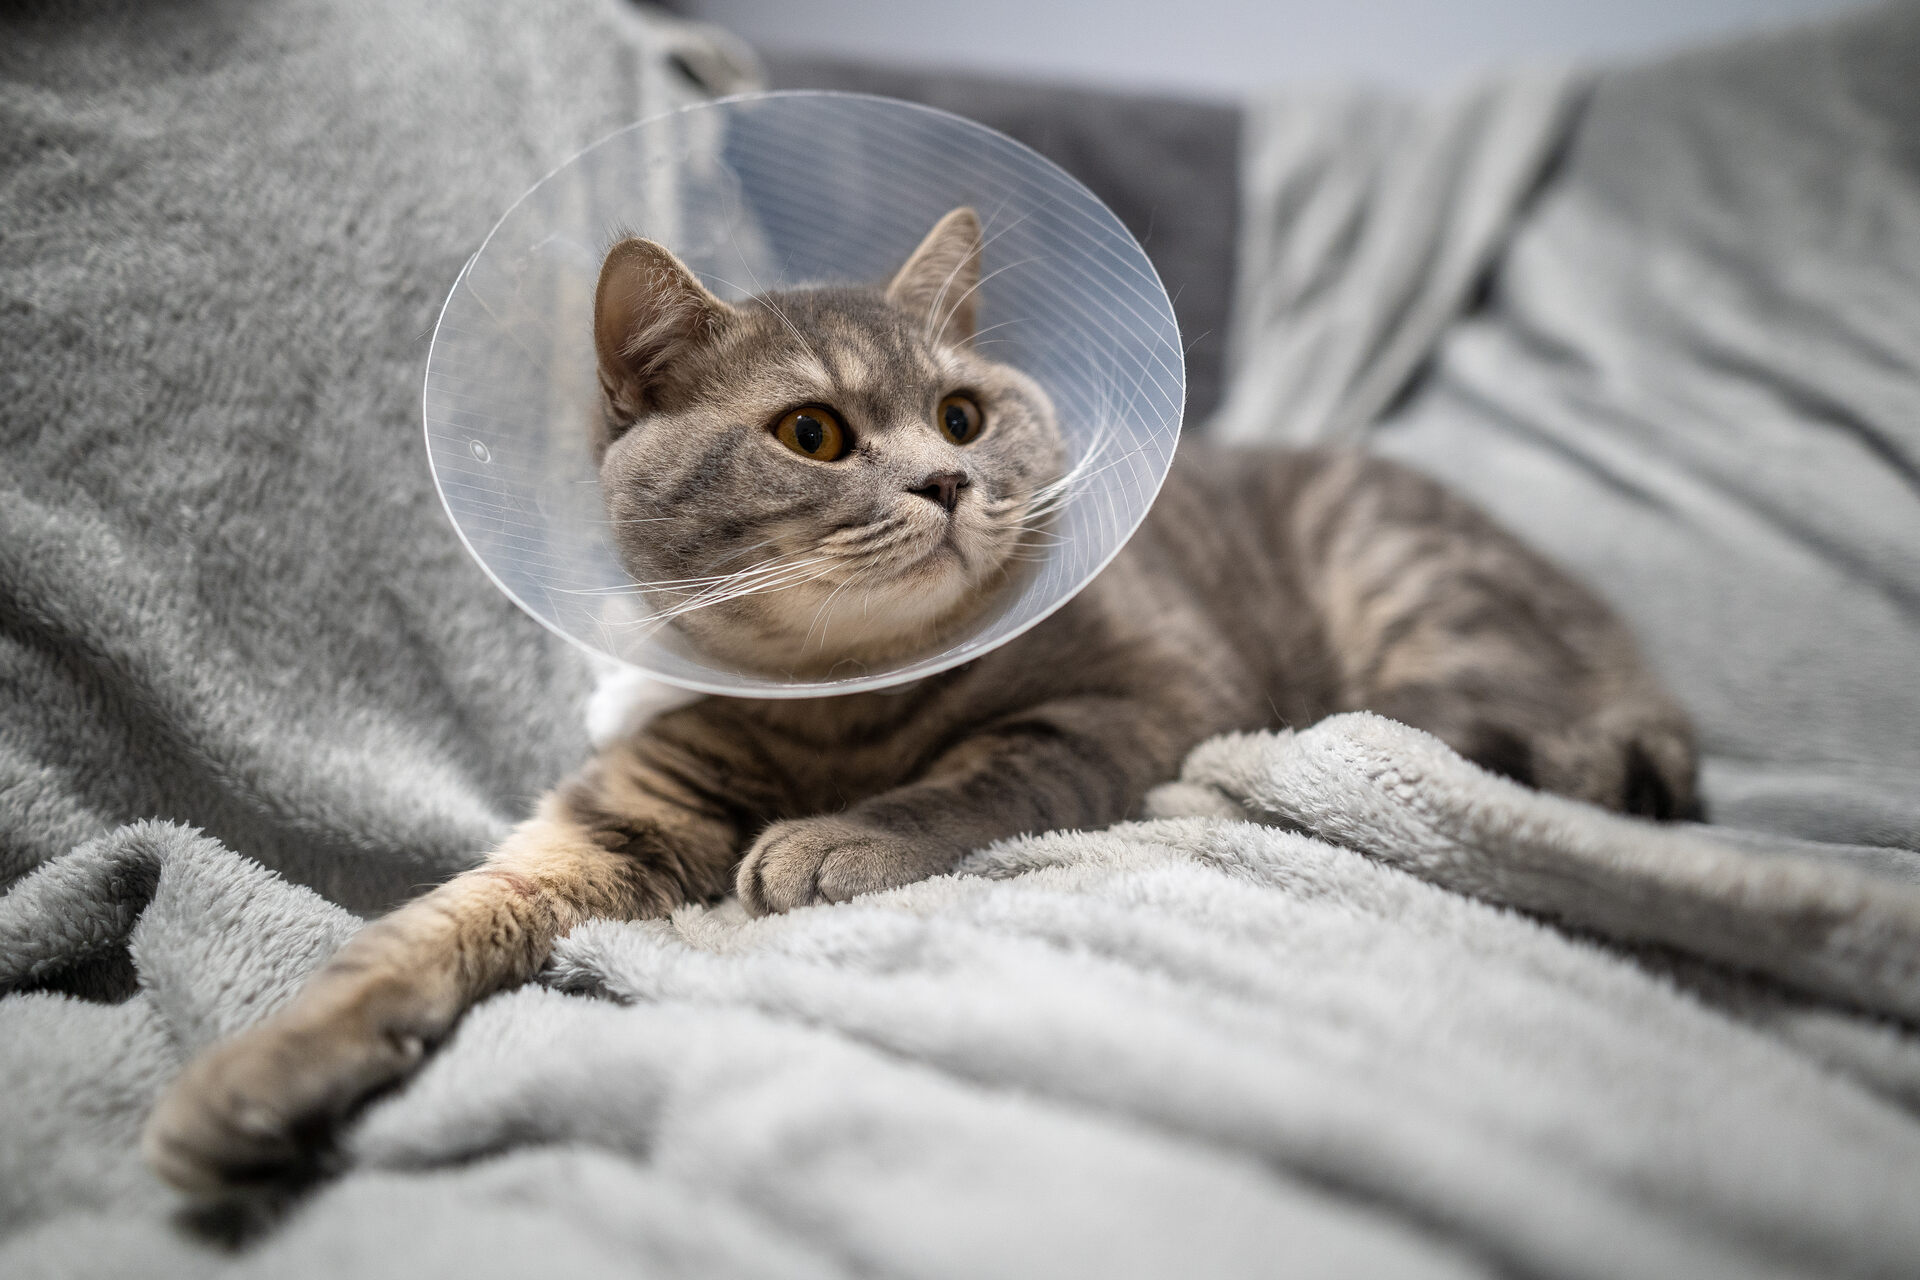 A cat wearing a cone collar sitting on a couch